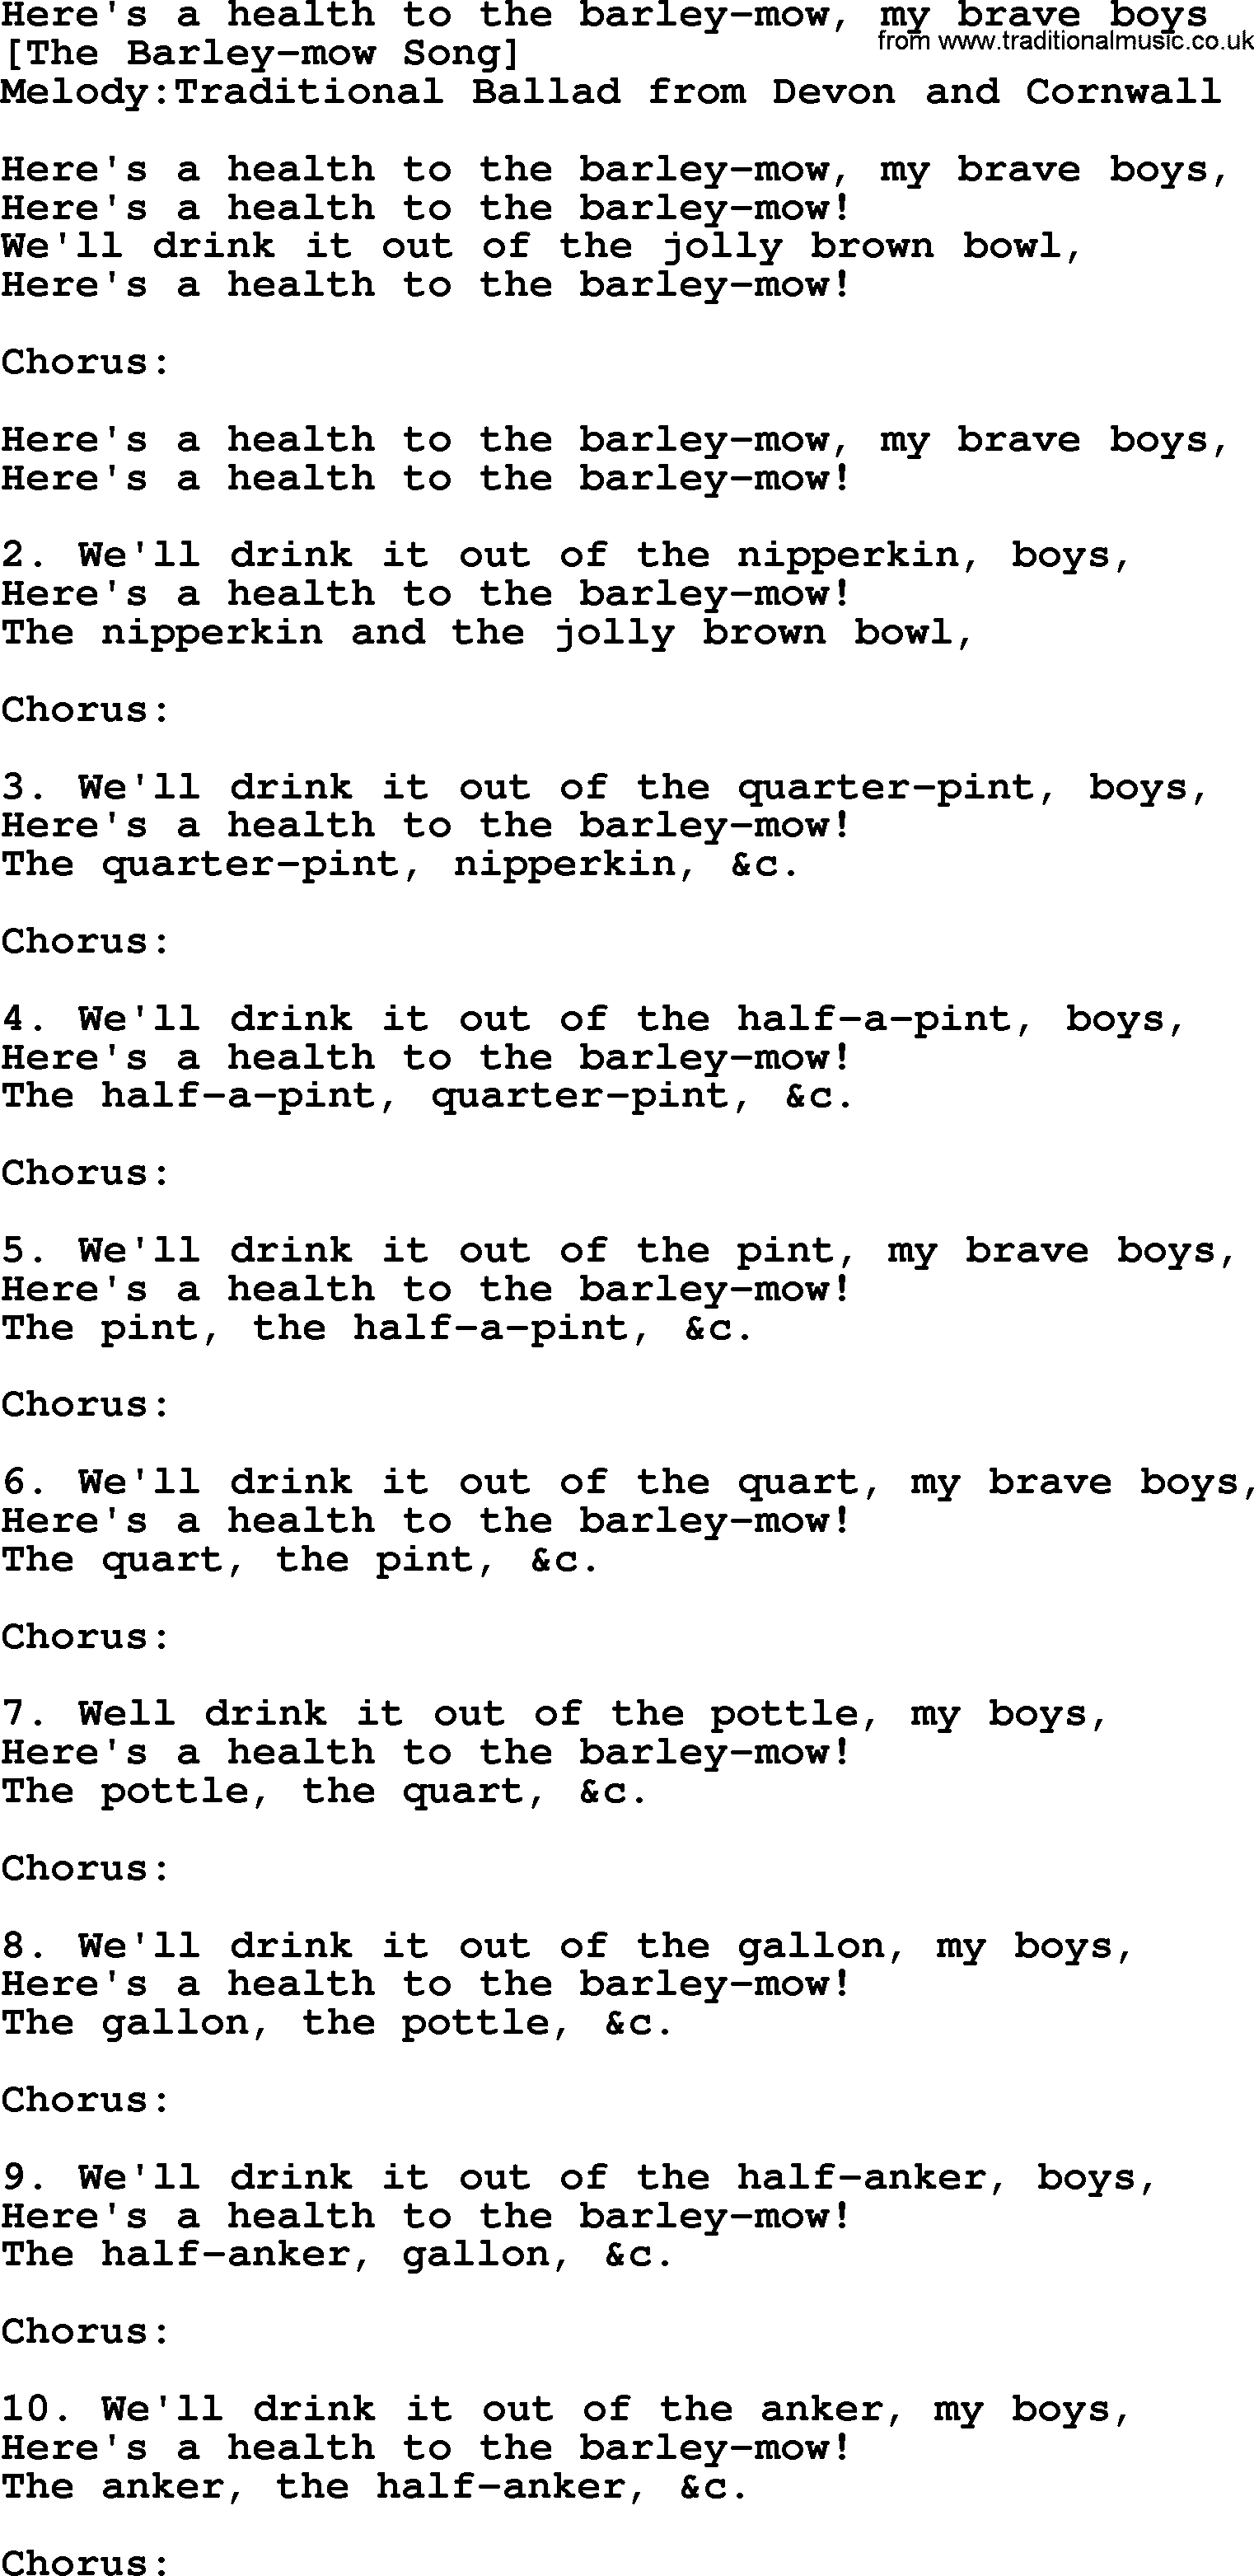 Old English Song: Here's A Health To The Barley-Mow, My Brave Boys lyrics